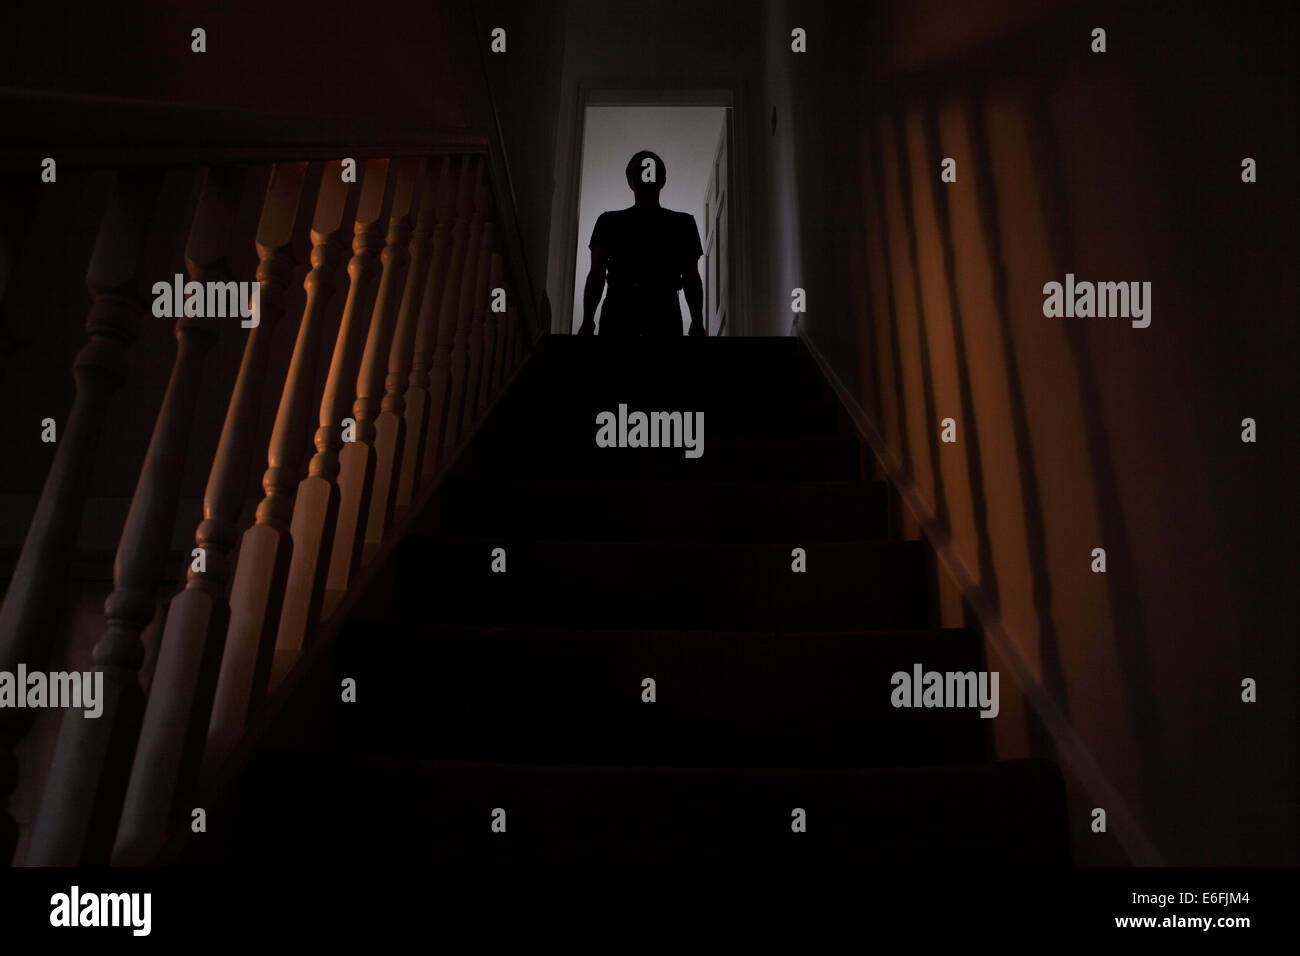 Silhouette of a man standing at the top of a stairway, shadows cast on the walls from the light below. Stock Photo